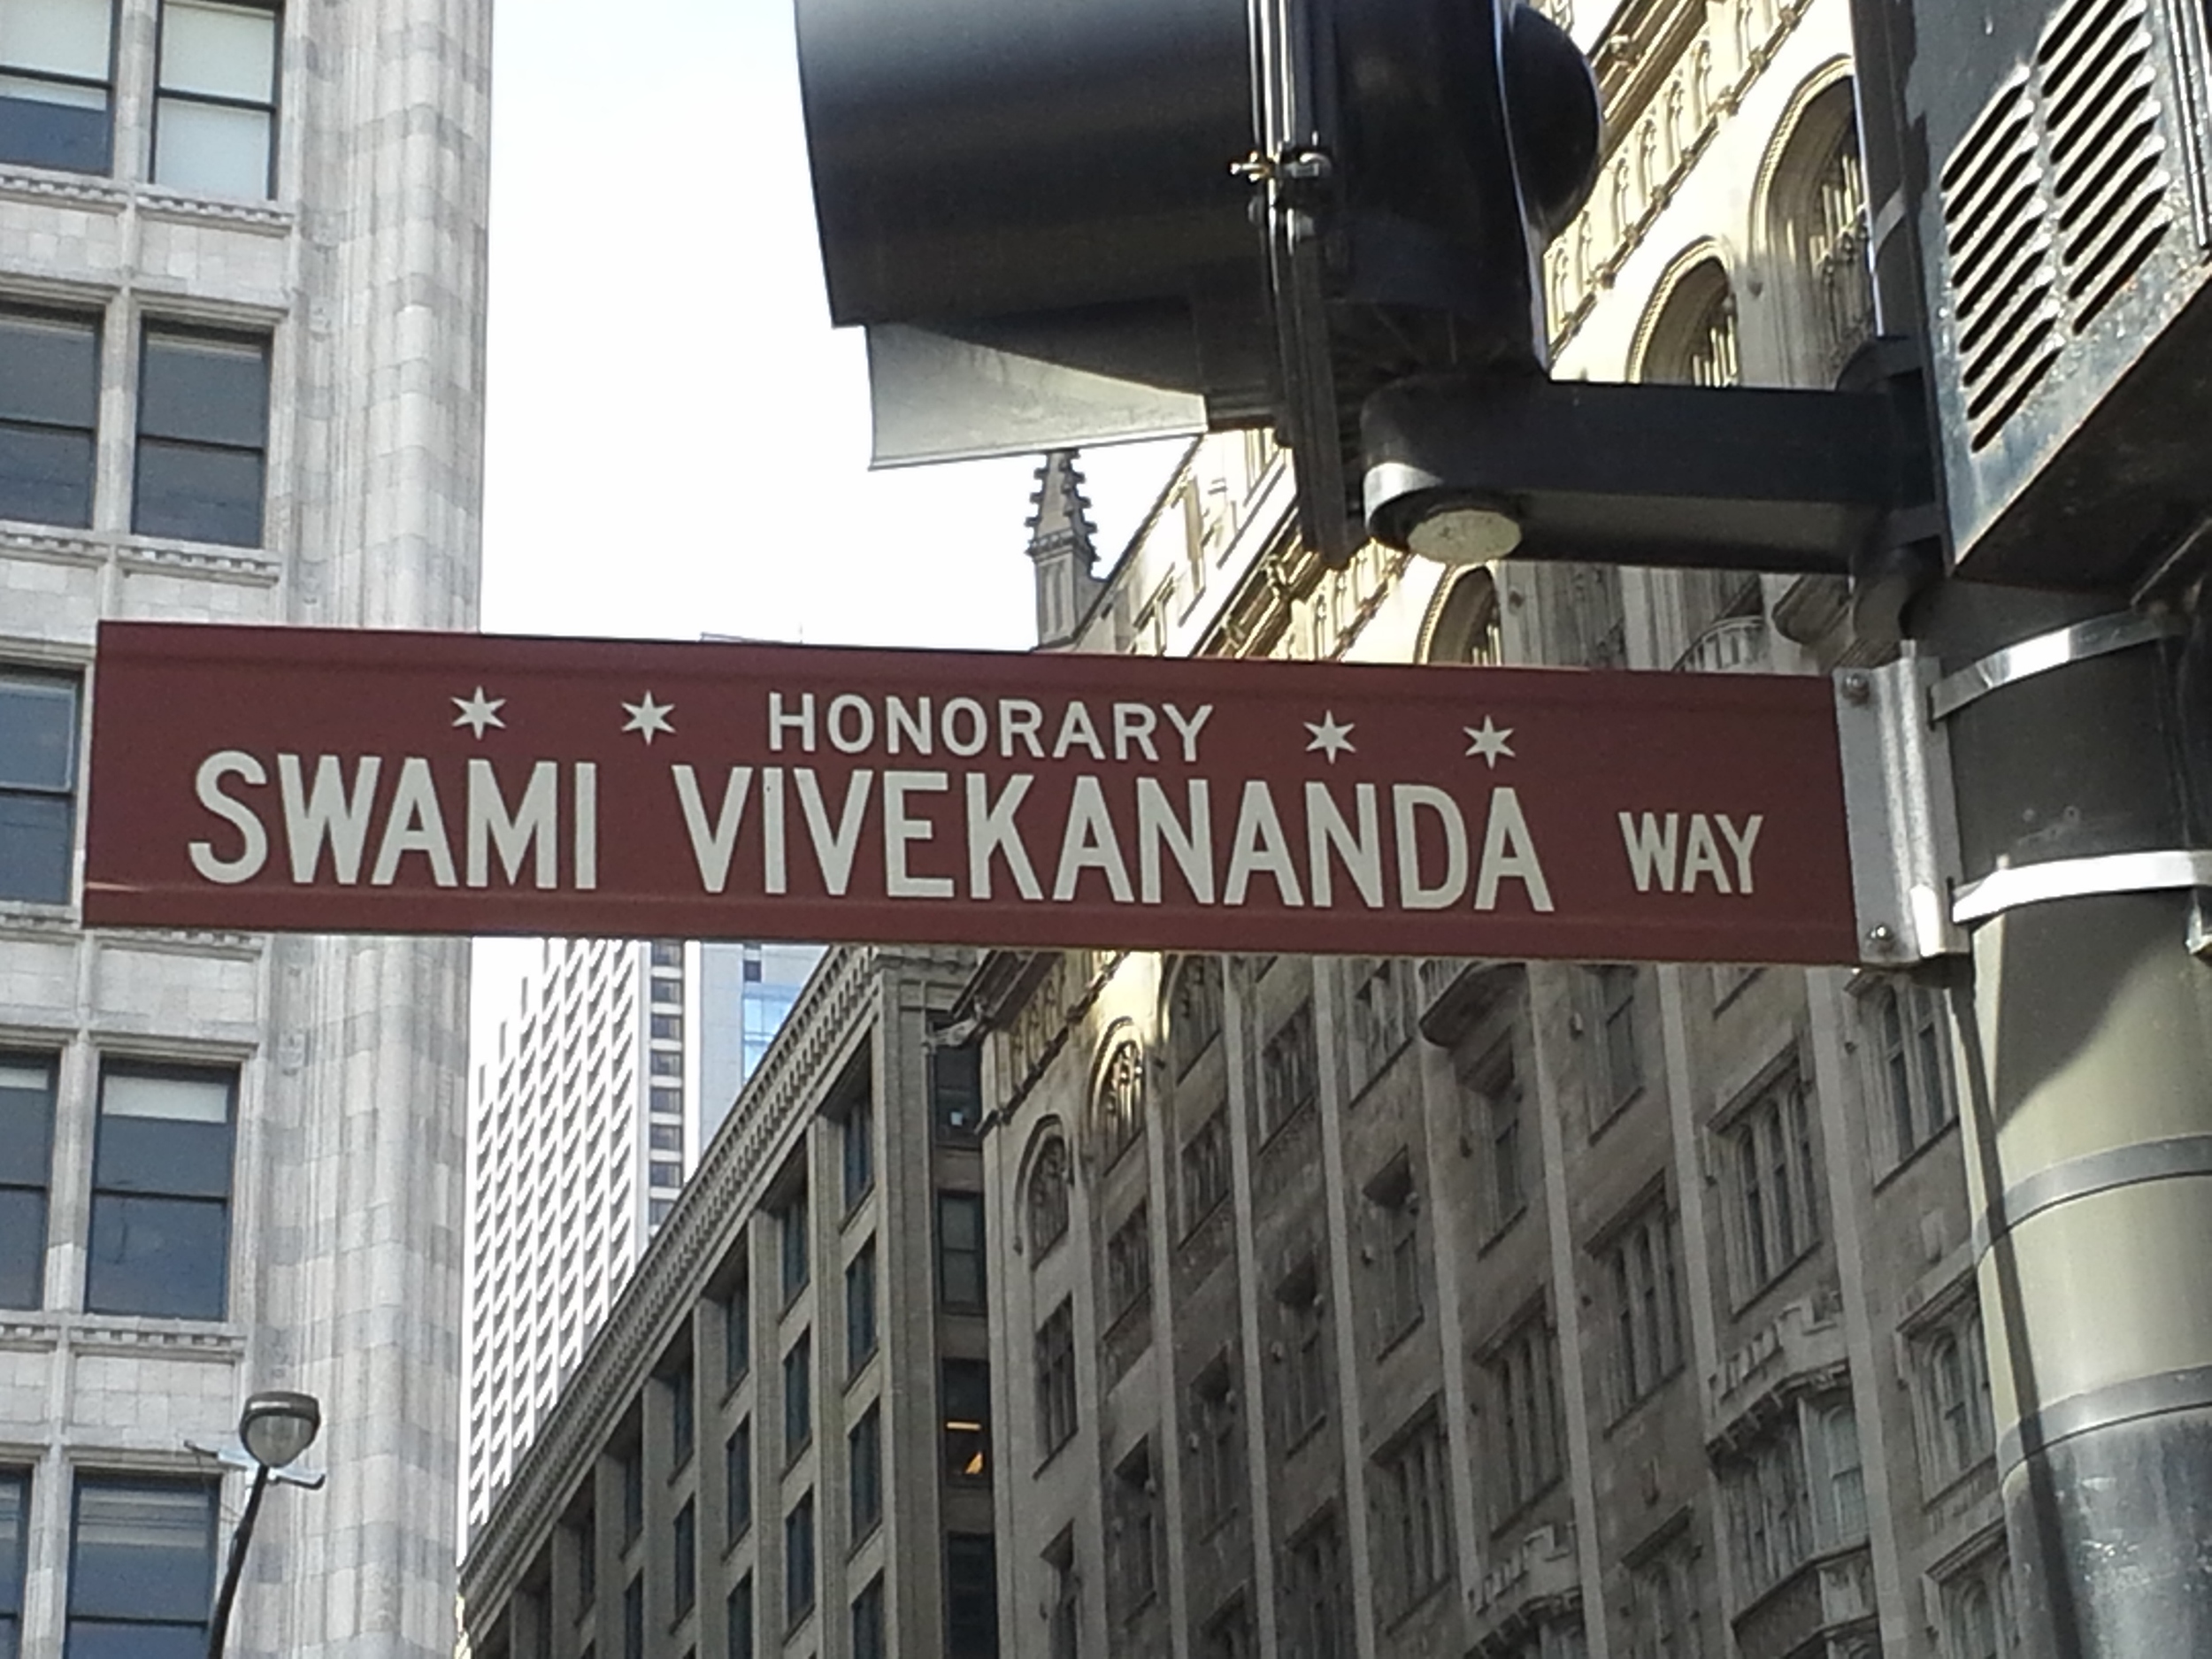 Swami Vivekananda Way - HonoraryChicago.  India Delegate to Parliment of World Religions 1893